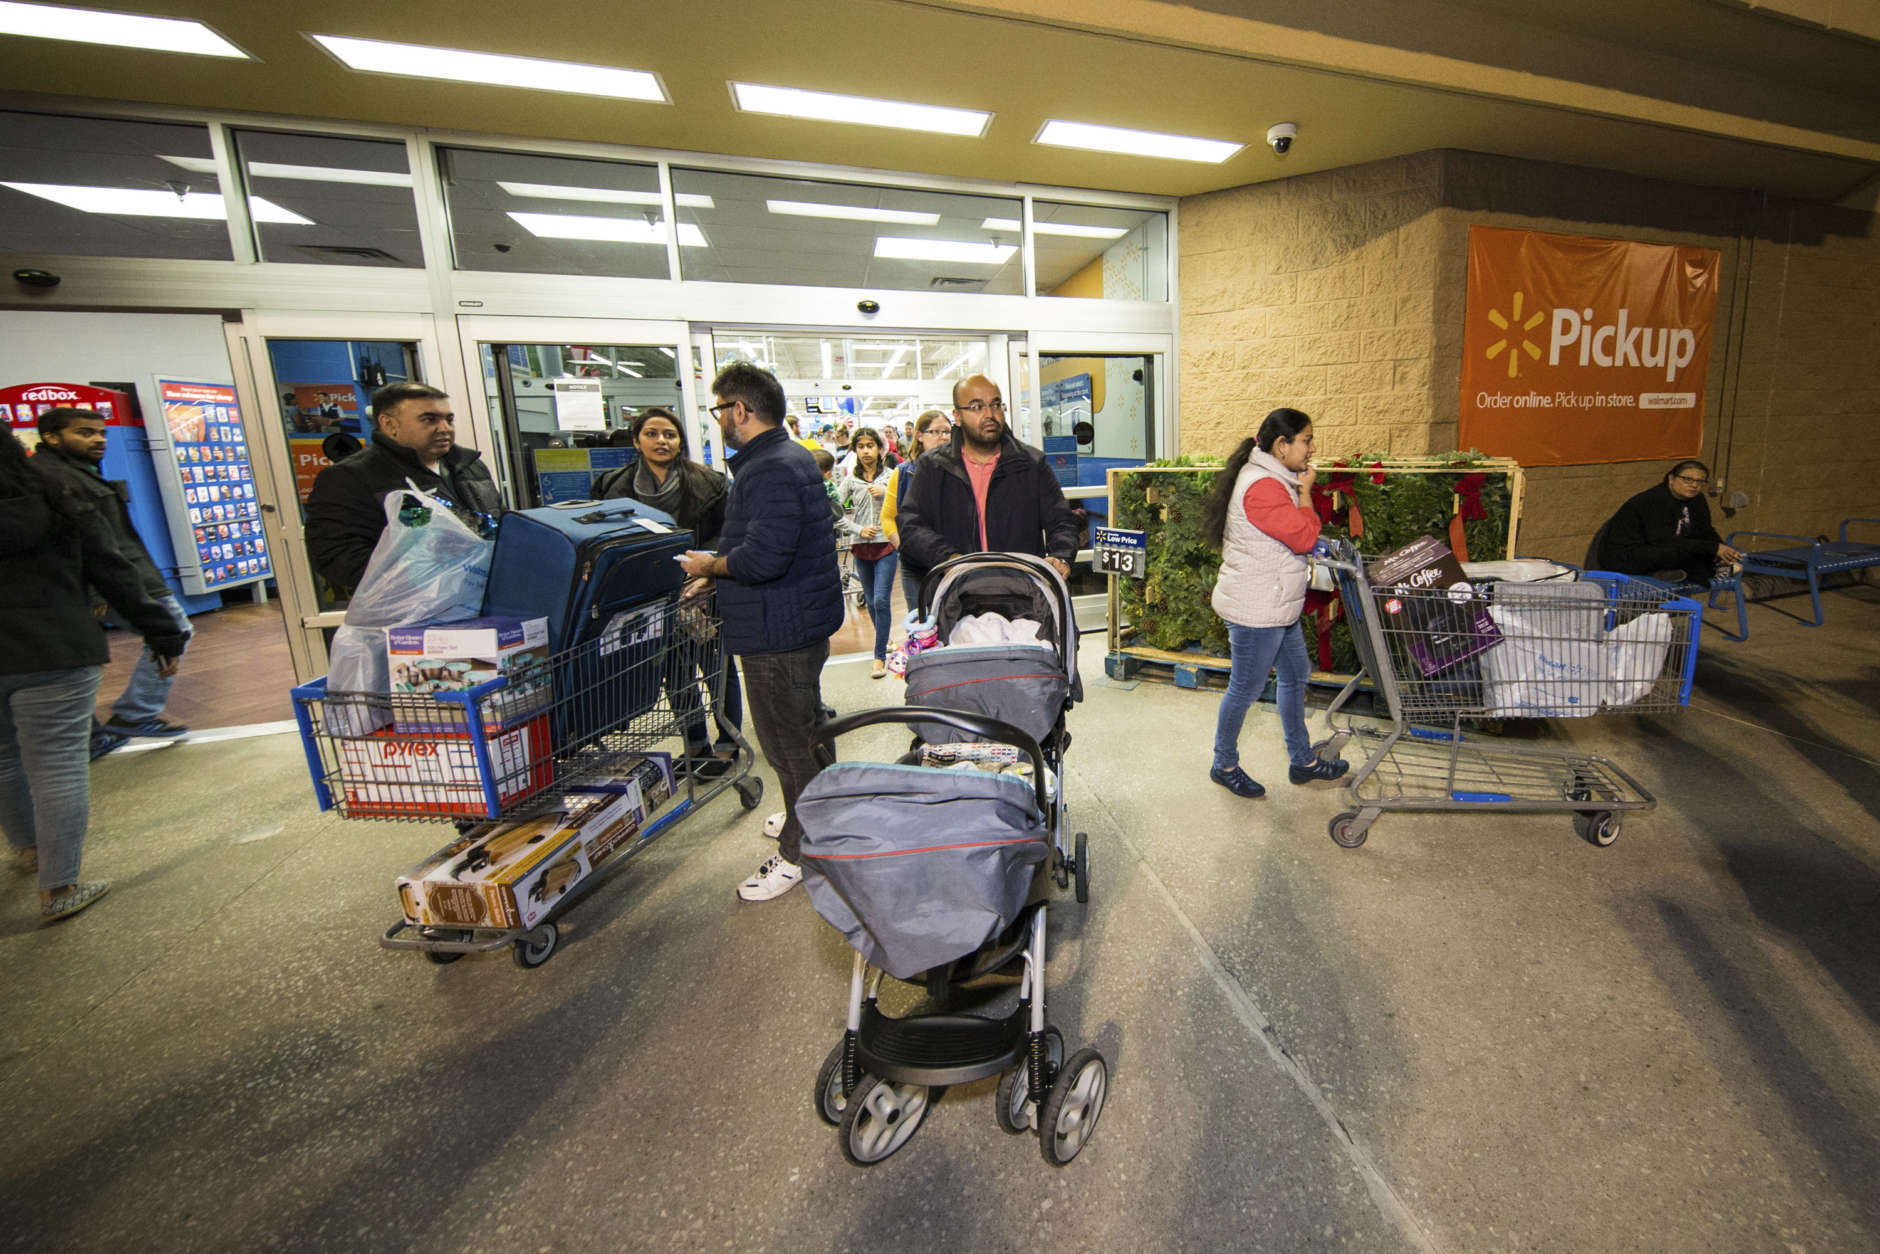 IMAGE DISTRIBUTED FOR WALMART - Walmart customers secured Black Friday deals on Thursday, Nov. 23, 2017 in Bentonville, Ark. This year, Walmart offered hundreds of deals online and in stores on TVs, smart home devices, and other gadgets. (Gunnar Rathbun/AP Images for Walmart)